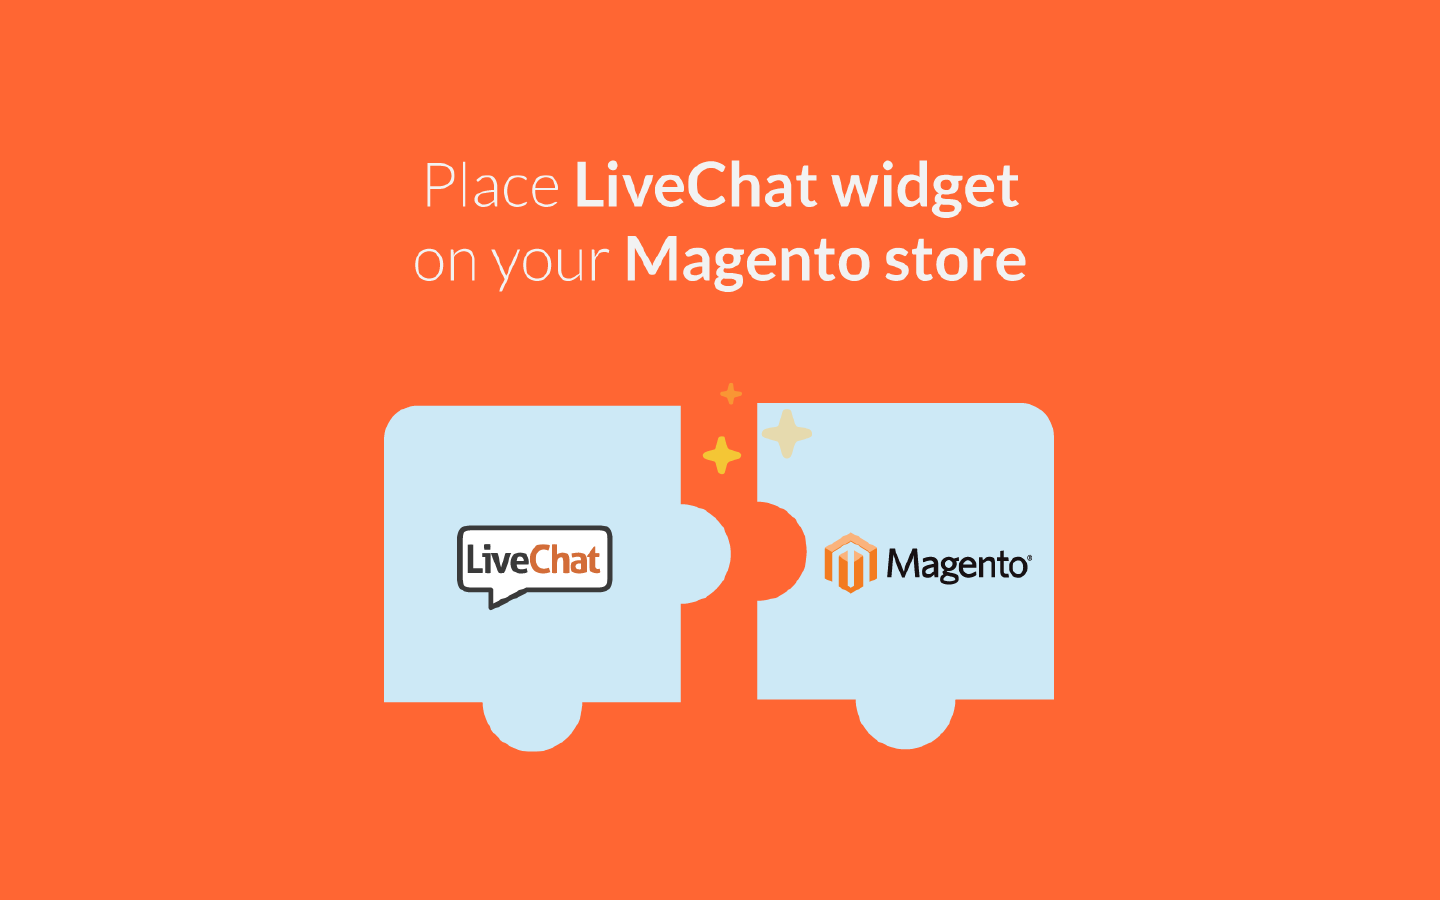 LiveChat integrates with Magento